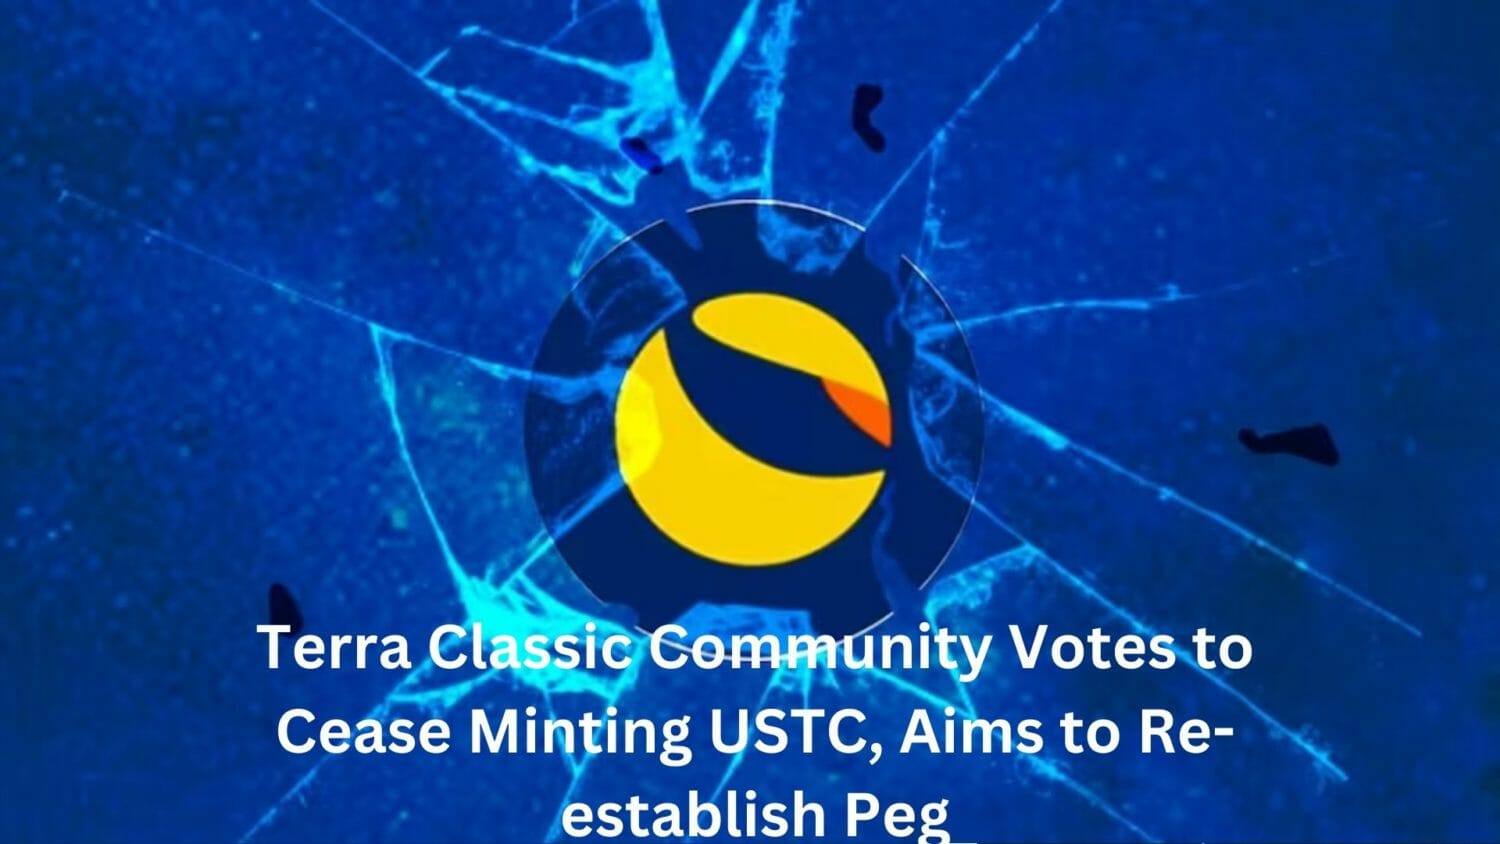 Terra Classic Community Votes To Cease Minting Ustc, Aims To Re-Establish Peg